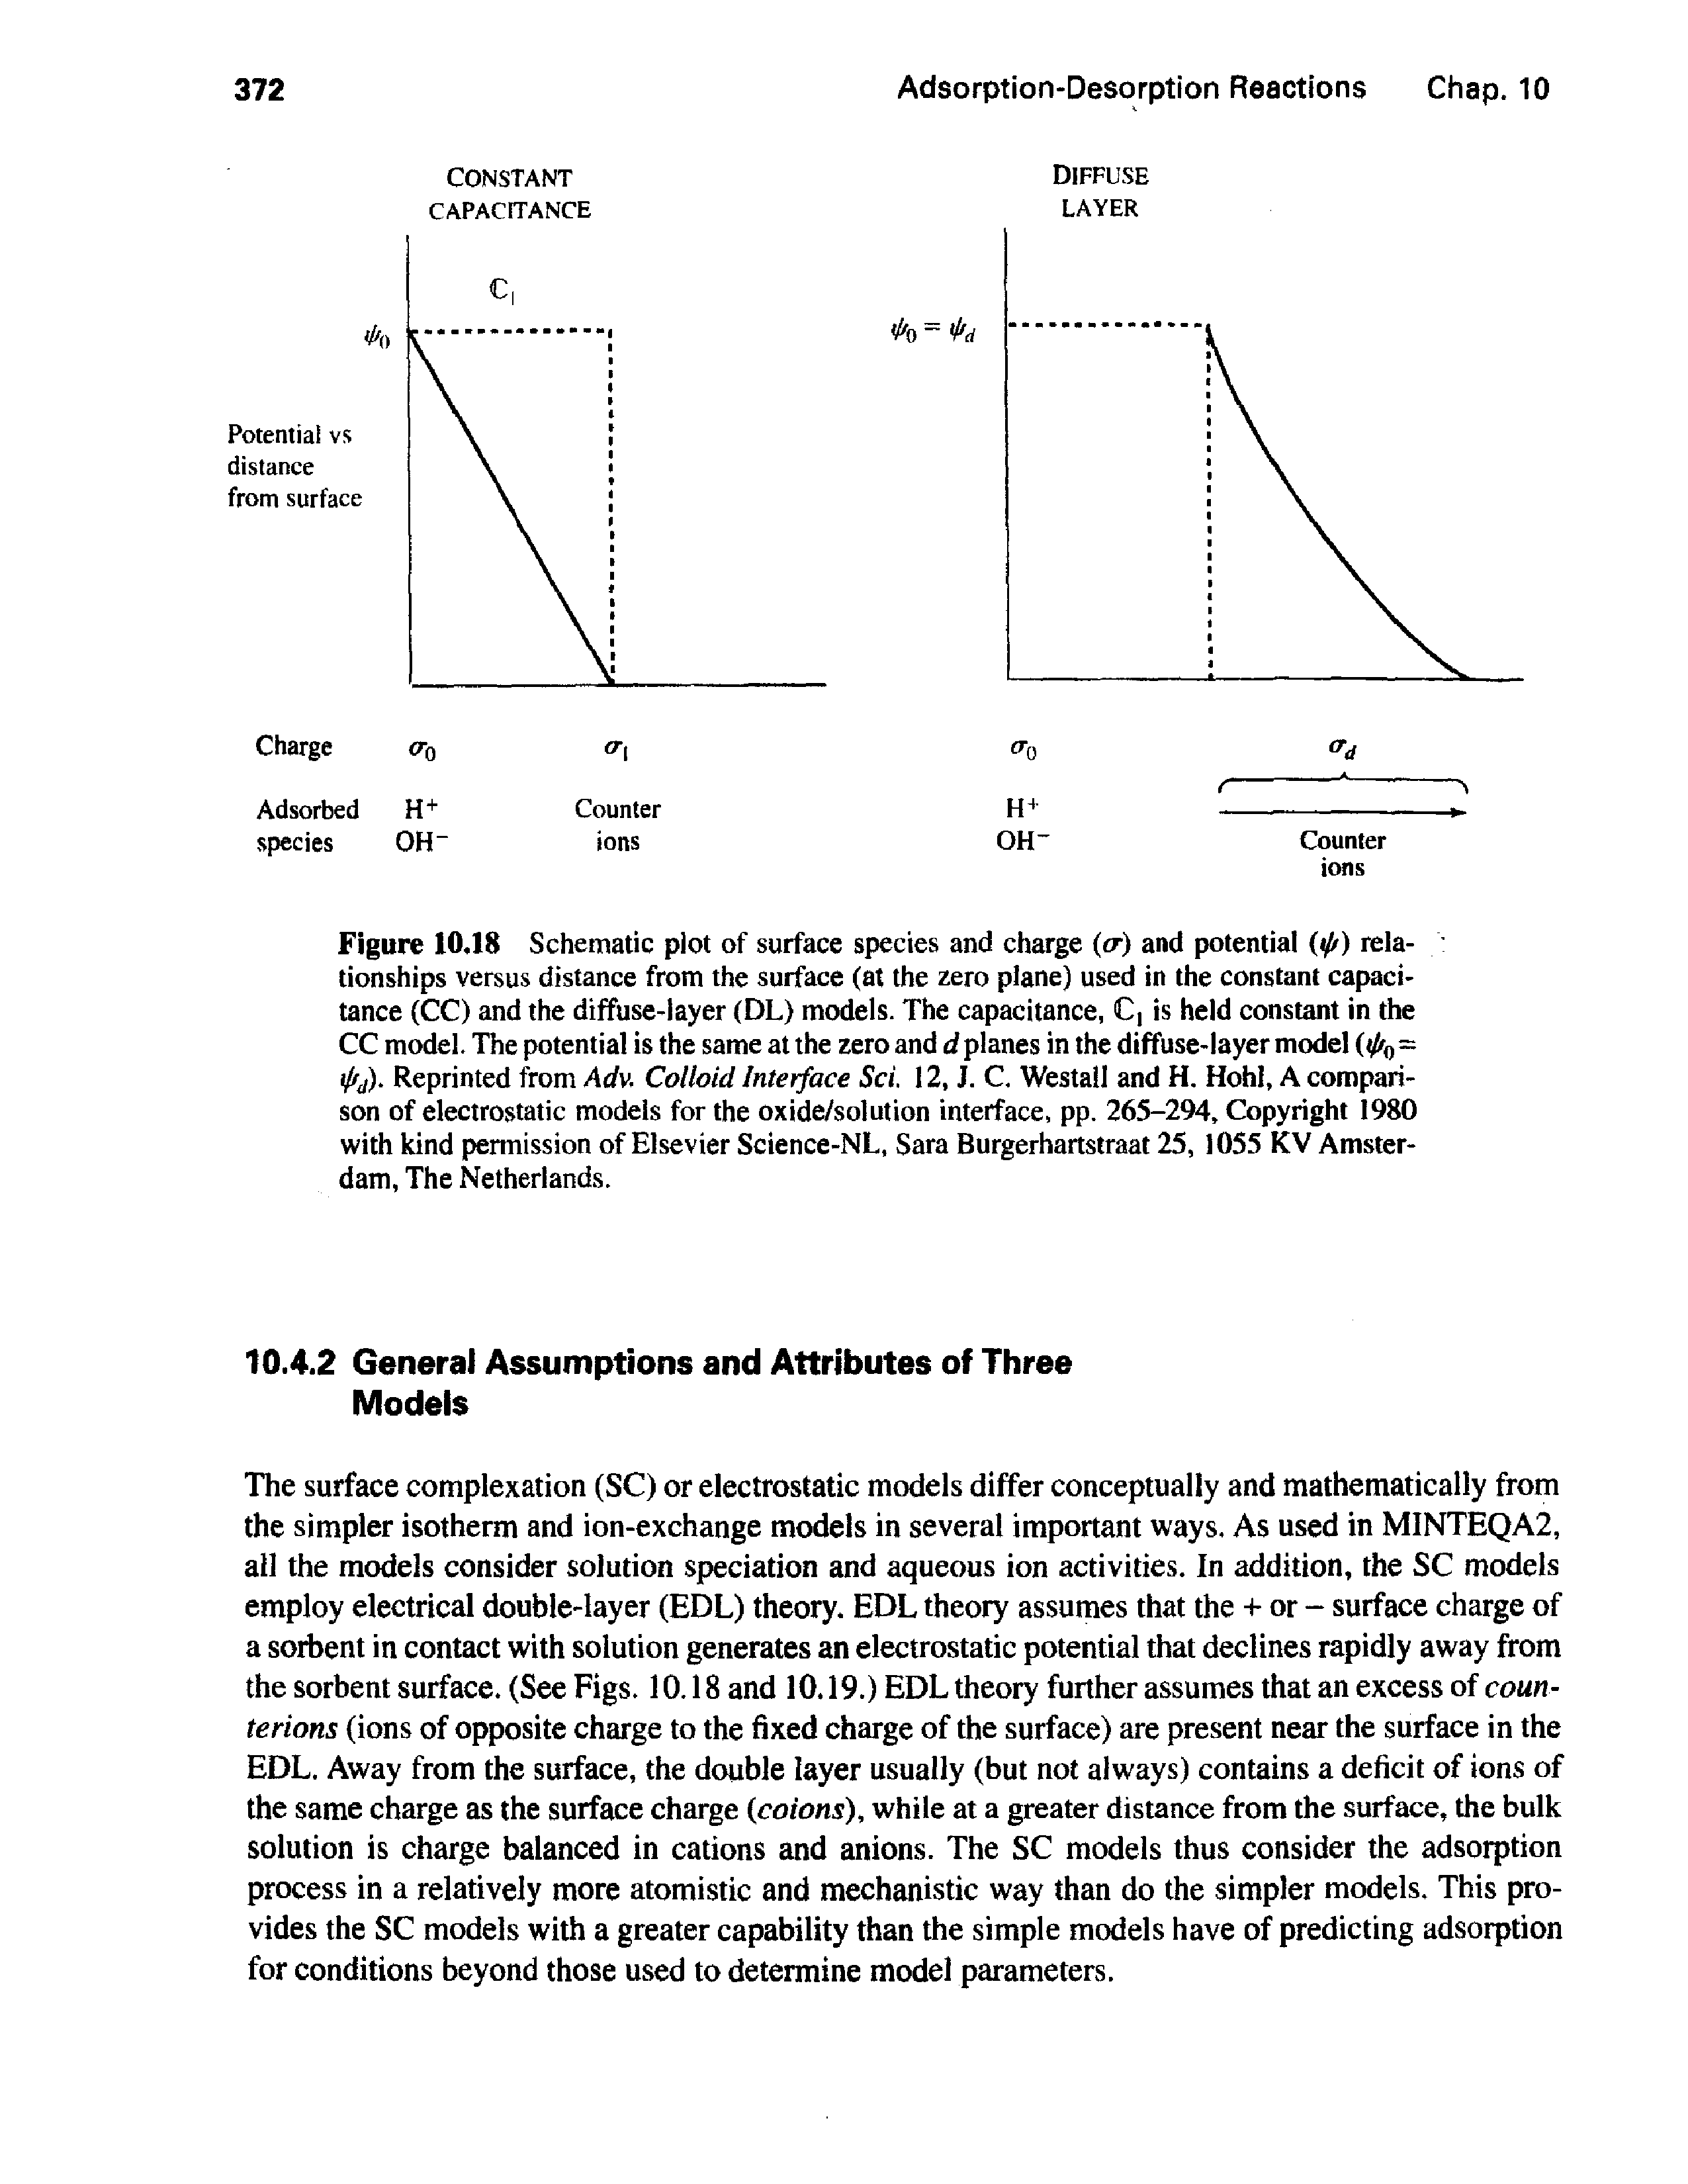 Figure 10,18 Schematic plot of surface species and charge (a) and potential ) relationships versus distance from the surface (at the zero plane) used in the constant capacitance (CC) and the diffuse-layer (DL) models. The capacitance, C is held constant in the CC model. The potential is the same at the zero and d planes in the diffuse-layer model i/fj). Reprinted from Adv. Colloid Interface Sci. 12, J. C. Westall and H. Hohl, A comparison of electrostatic models for the oxide/solution interface, pp. 265-294, Copyright 1980 with kind permission of Elsevier Science-NL, Sara Burgerhartstraat 25, 1055 KV Amsterdam, The Netherlands.